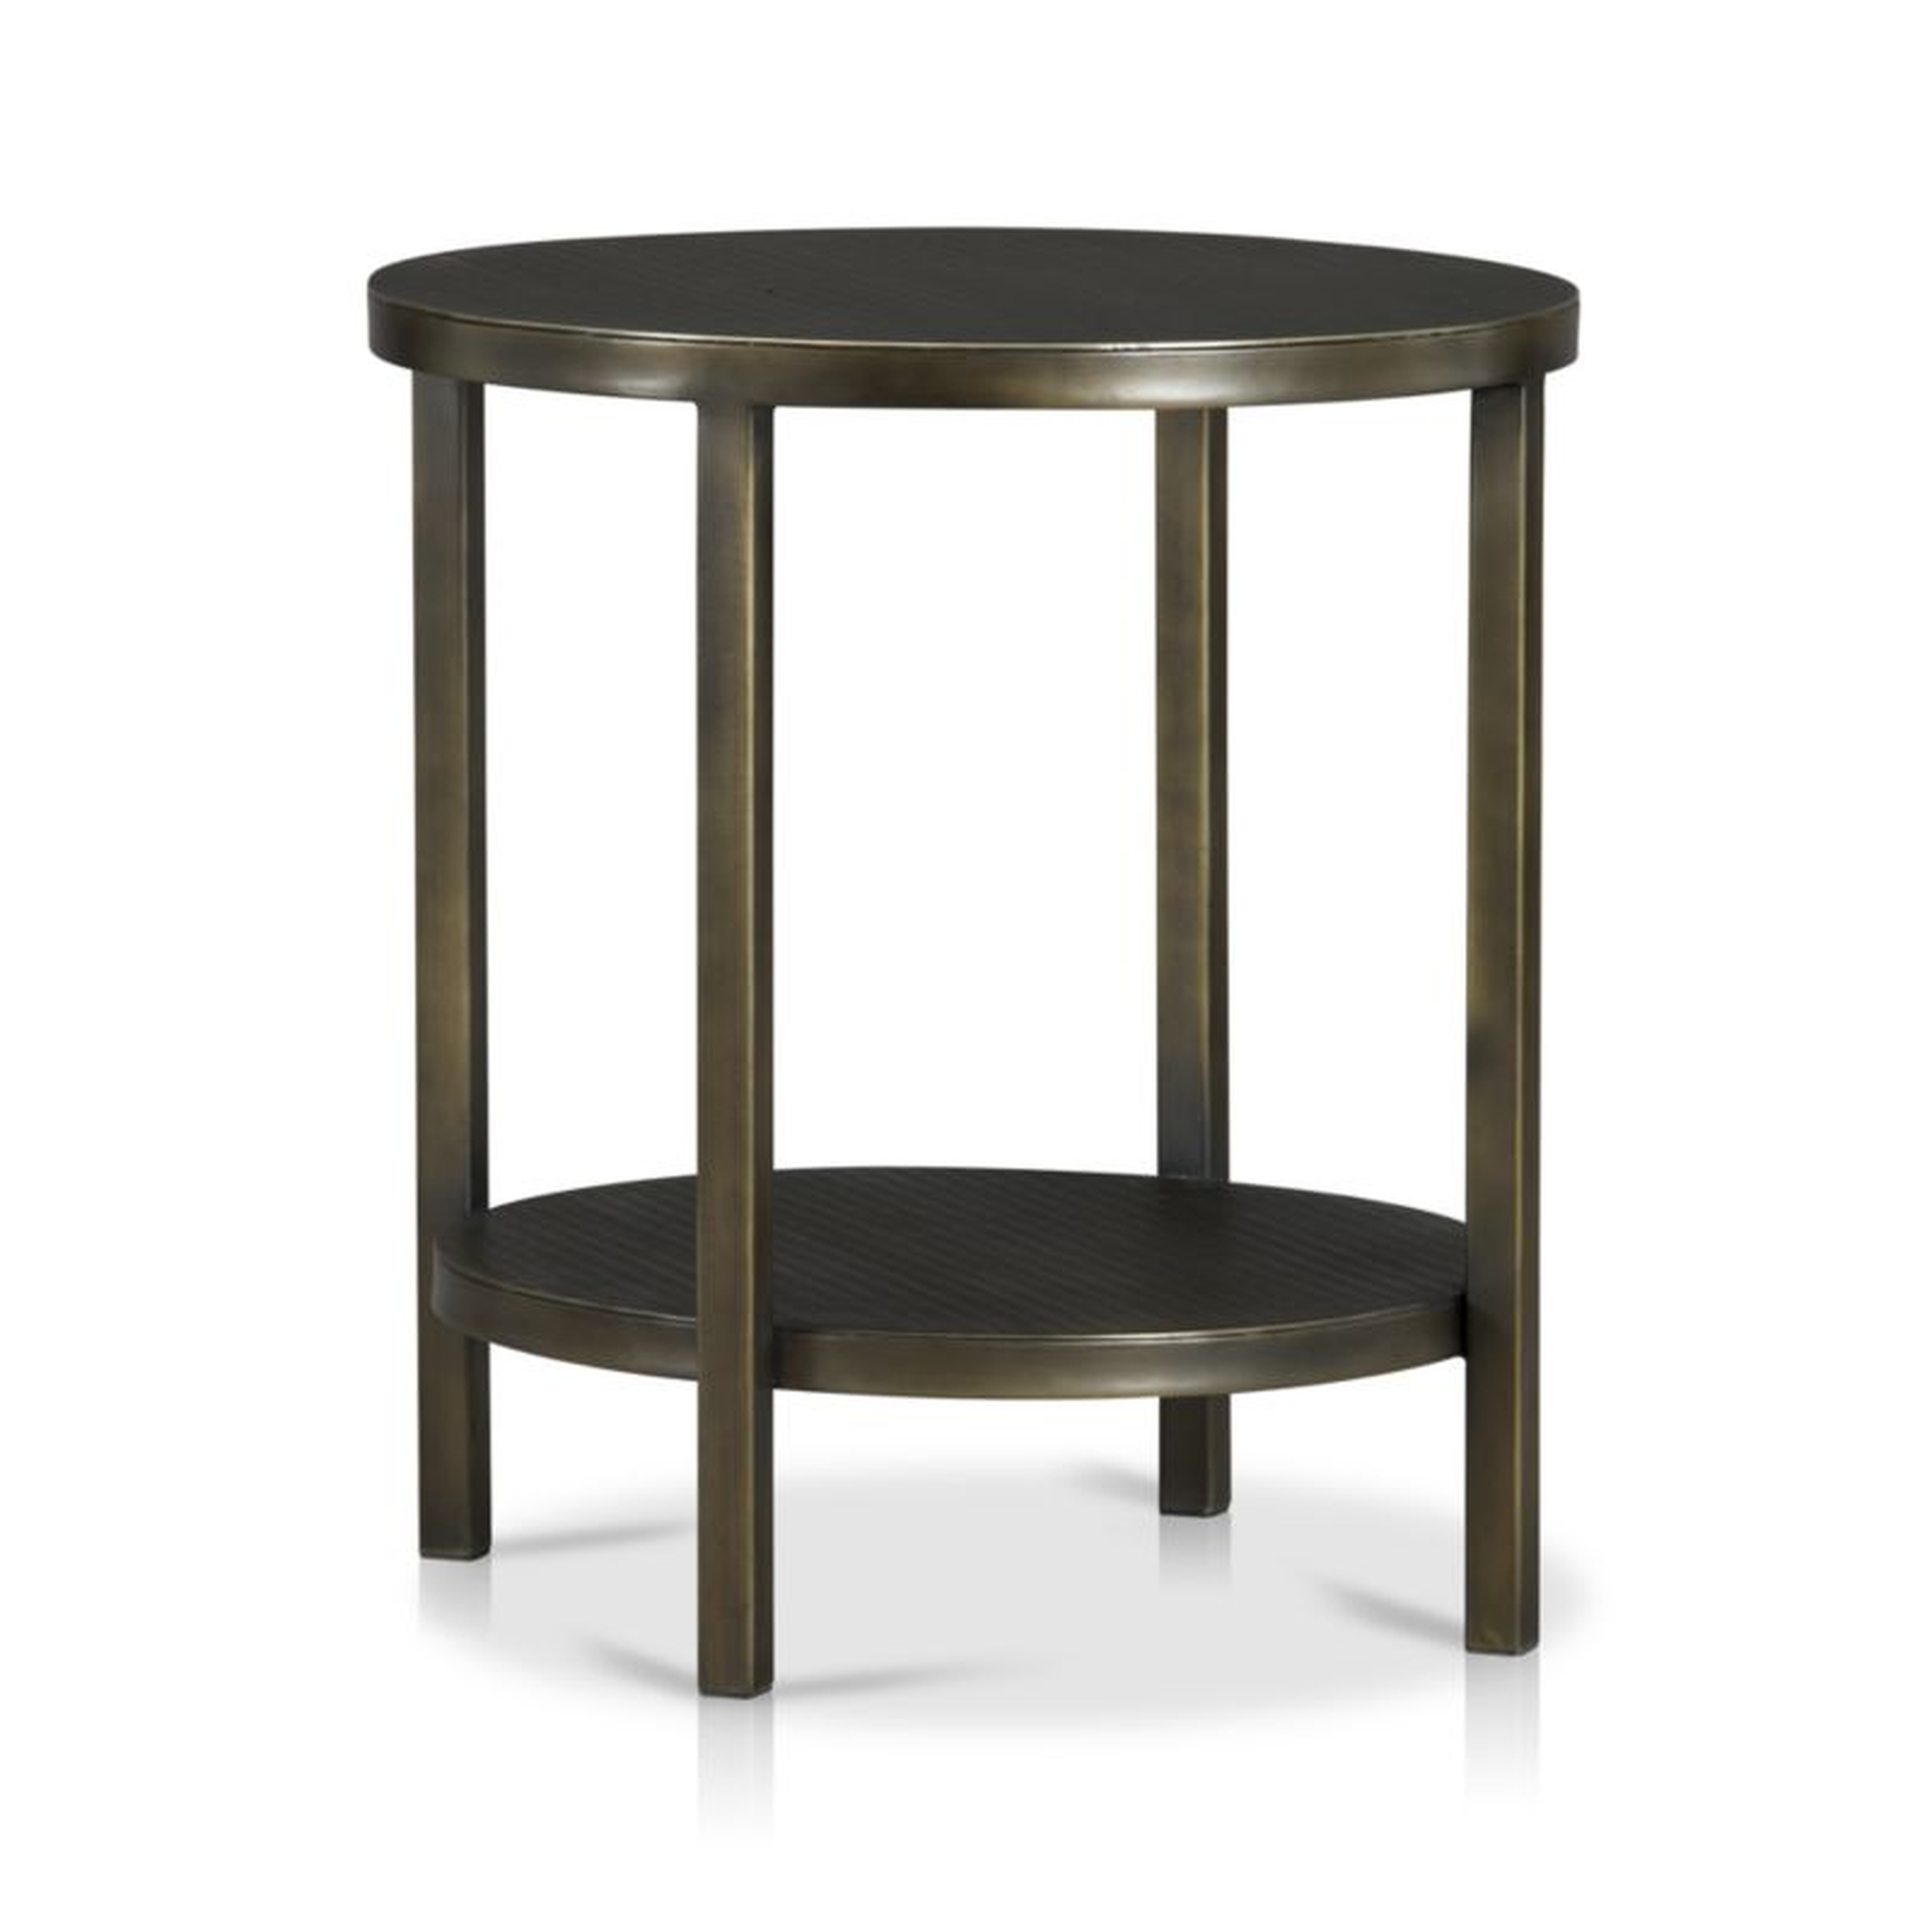 Echelon Round Side Table with Shelf - Crate and Barrel